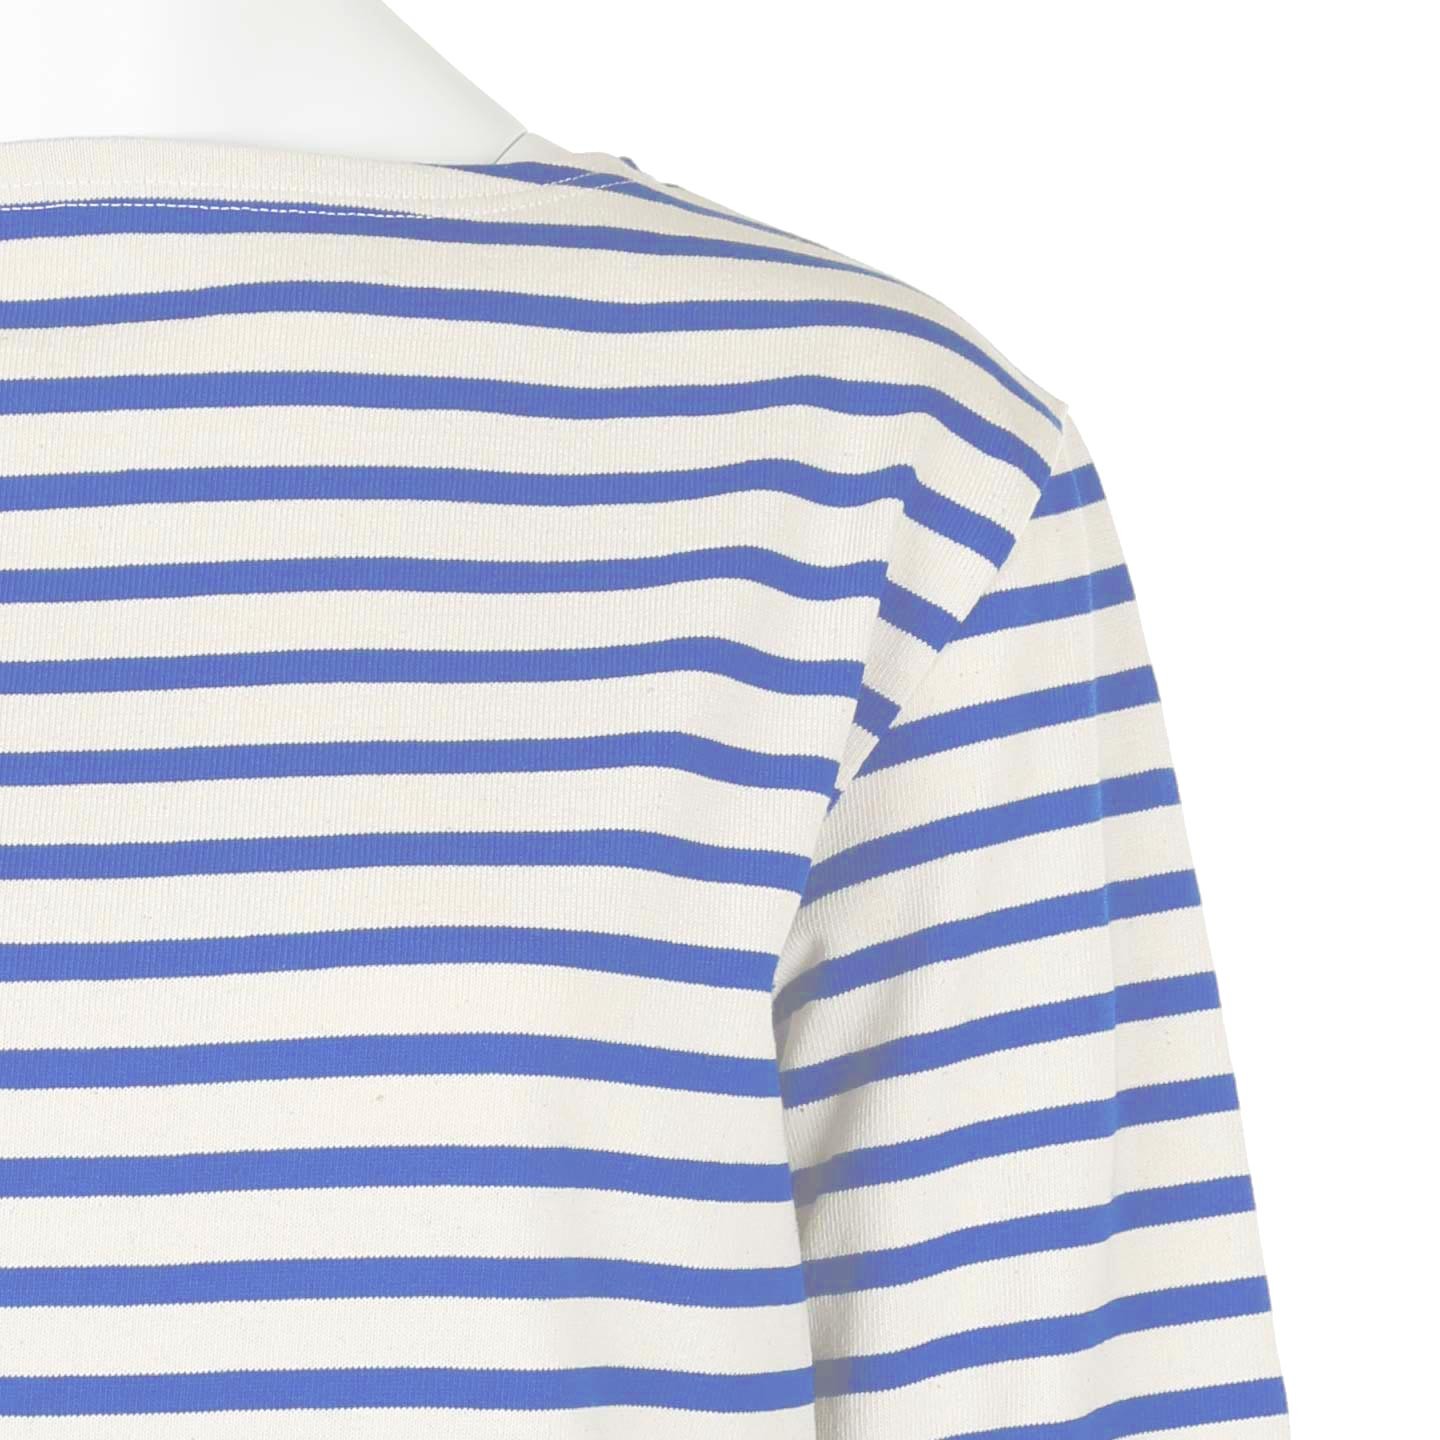 Striped shirt Ecru / Blue, unisex made in France Orcival